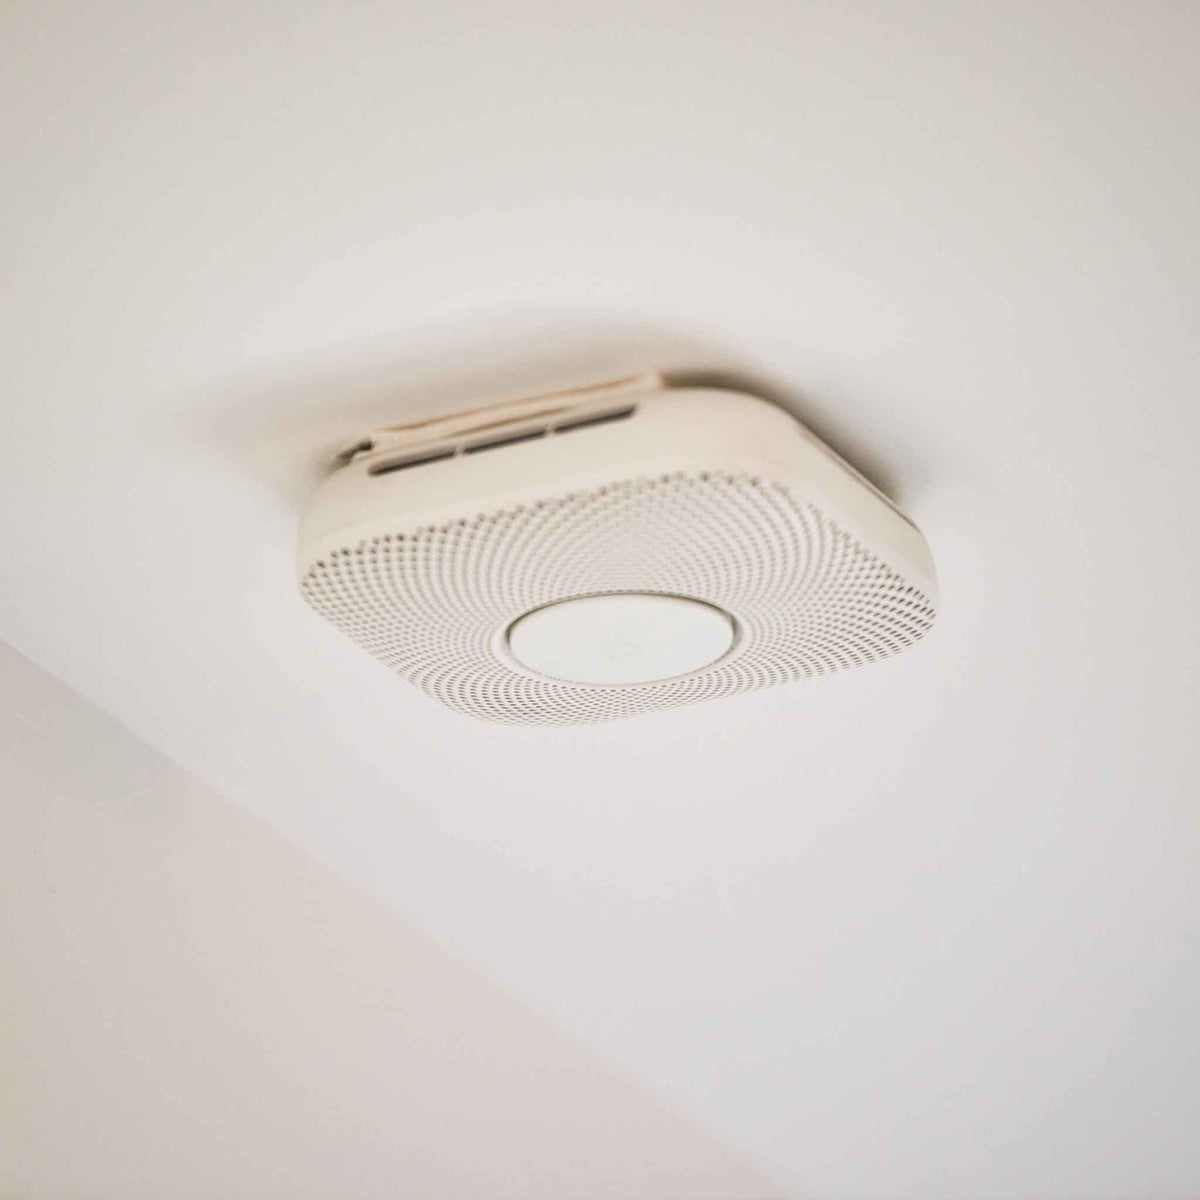 Battery Smoke & CO Alarm Installation- Up to 3 Devices